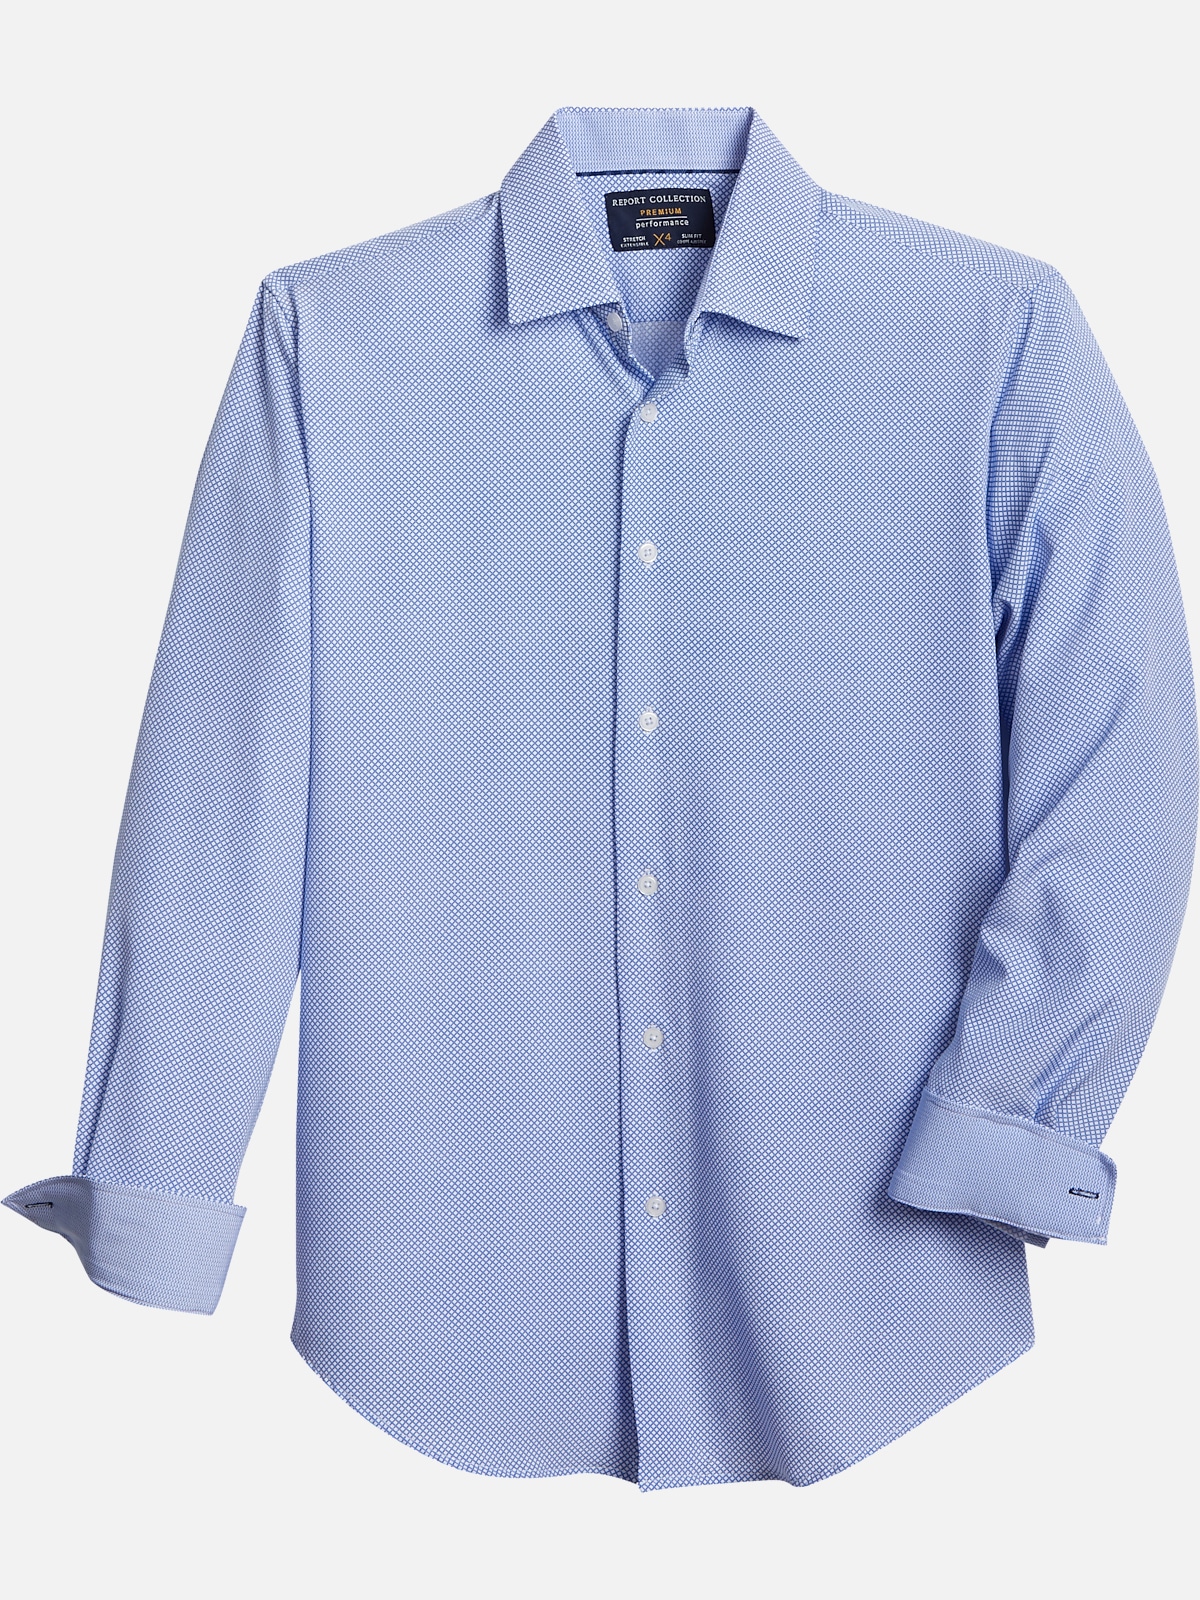 Report Collection Modern Fit 4-Way Stretch Sport Shirt | All Sale| Men\'s  Wearhouse